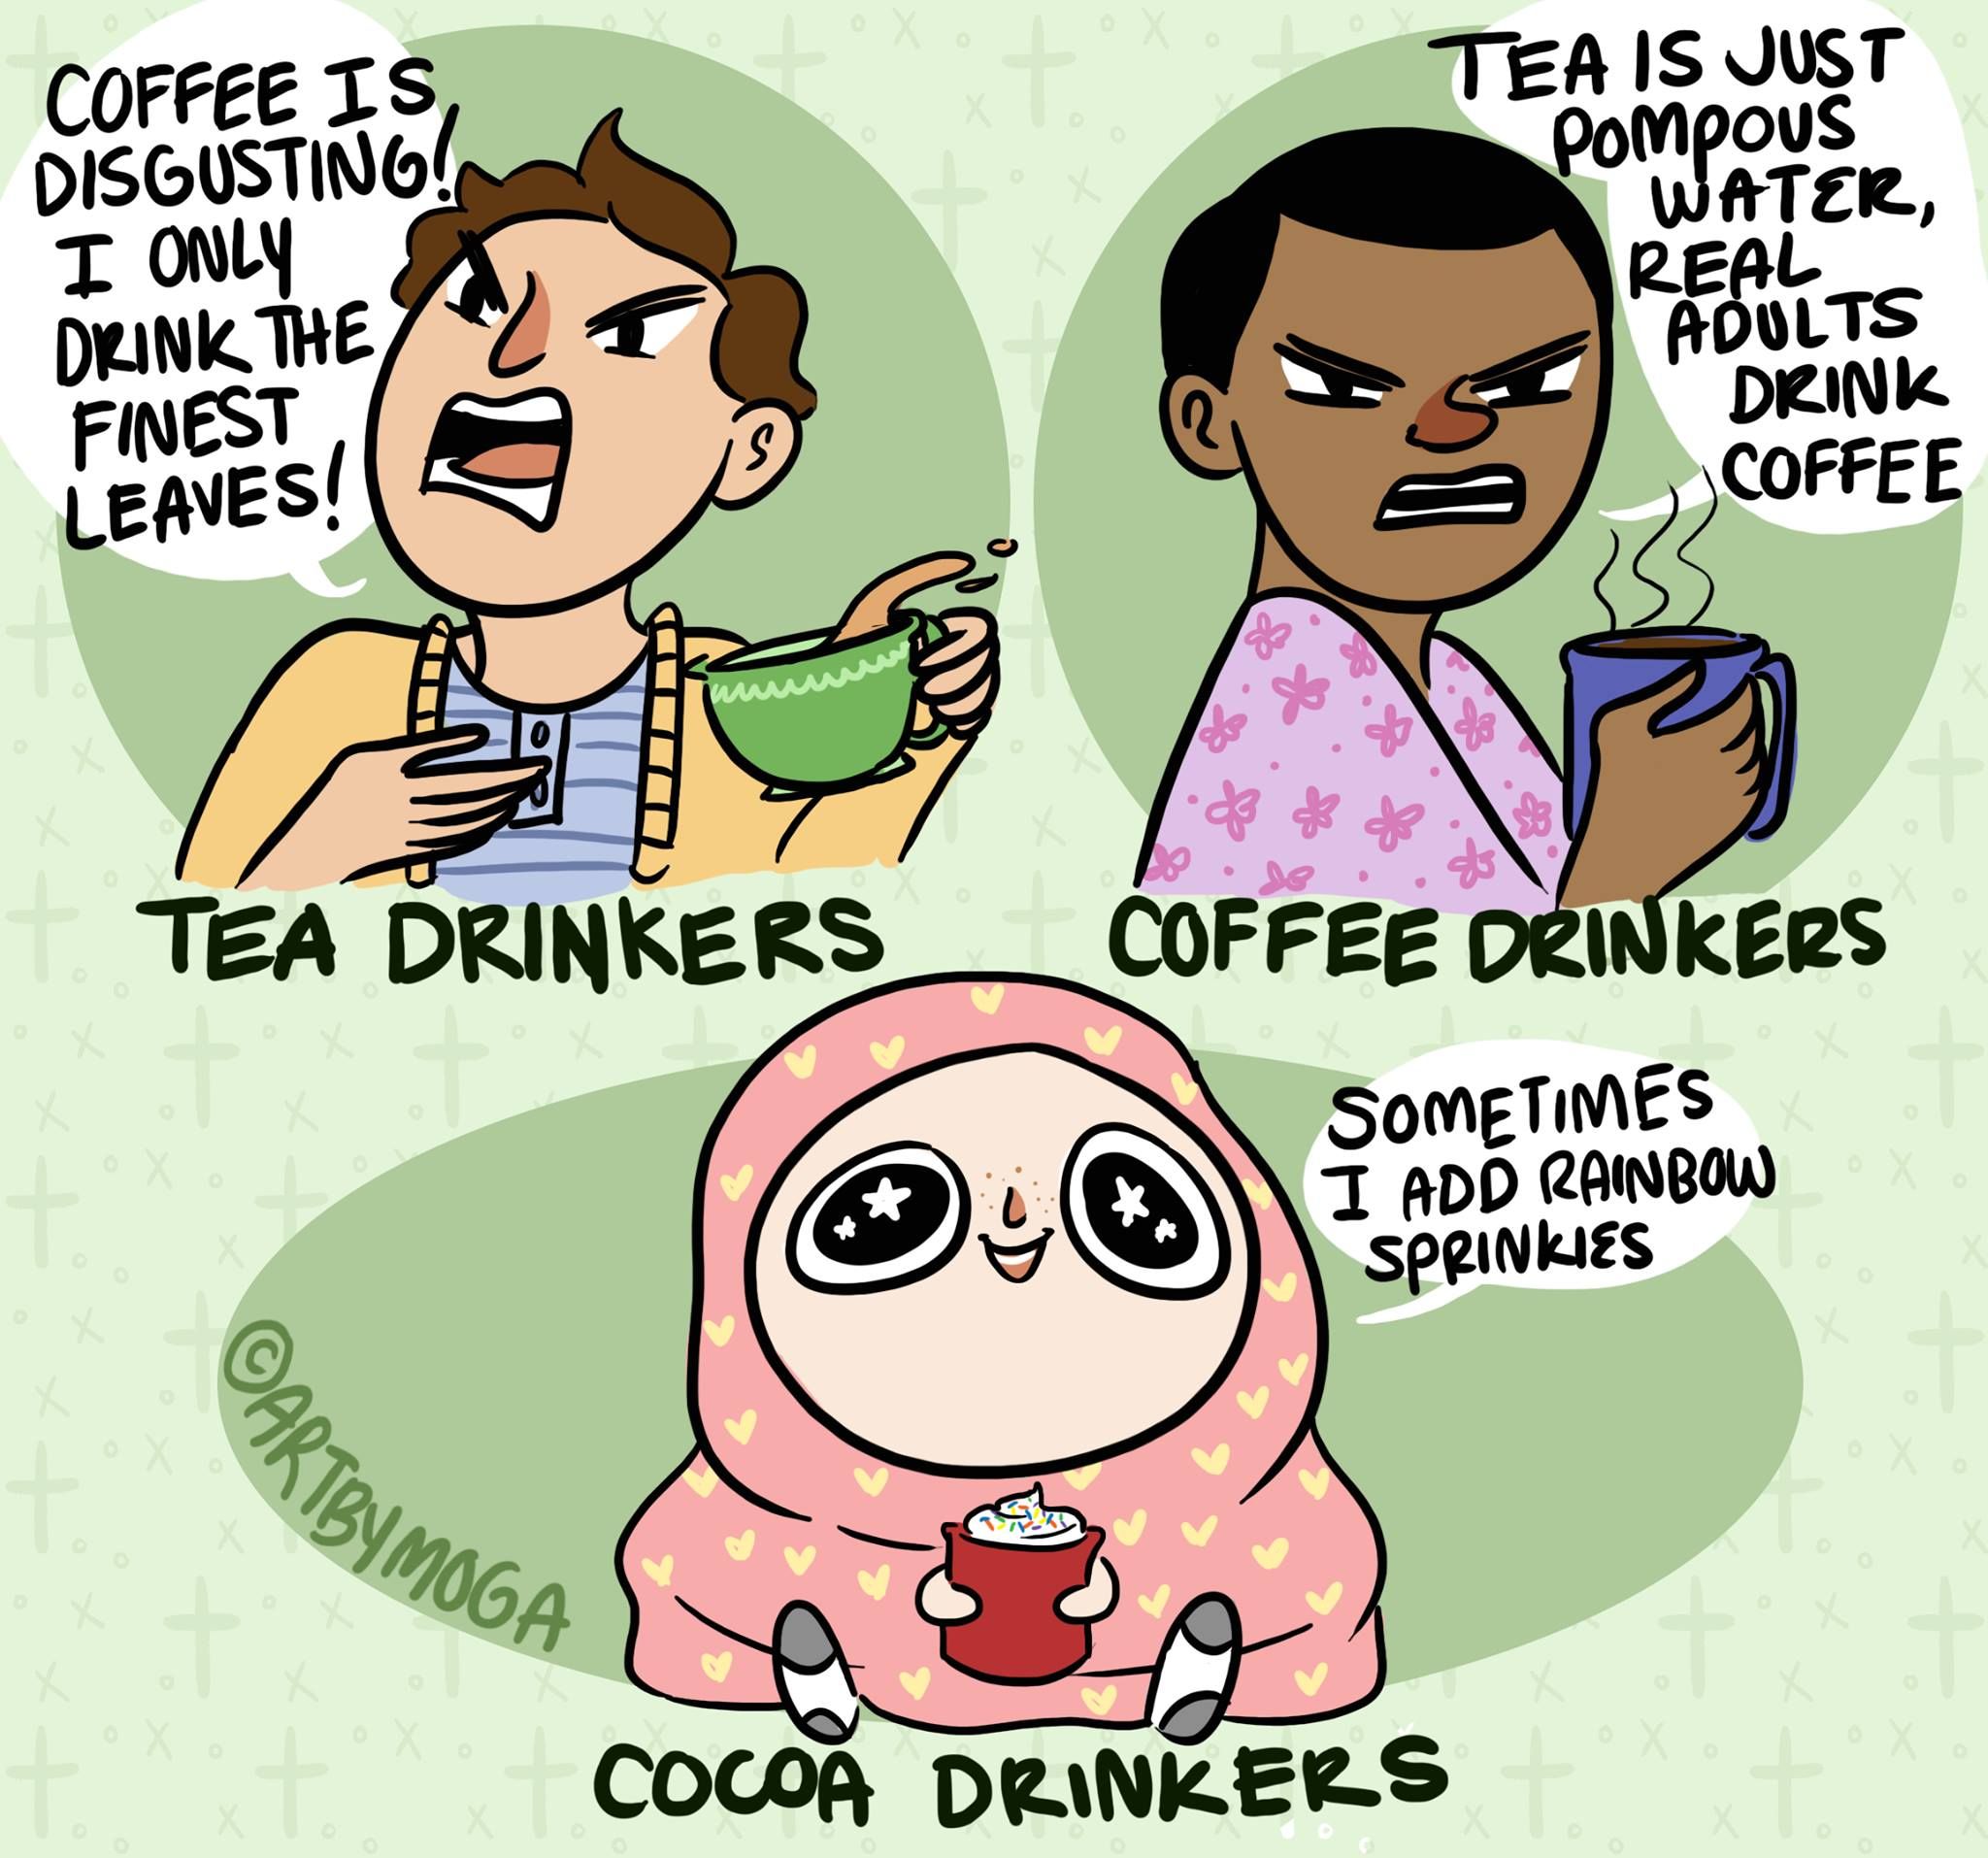 One thing coffee and tea drinkers can agree on... cocoa drinkers are plebs.